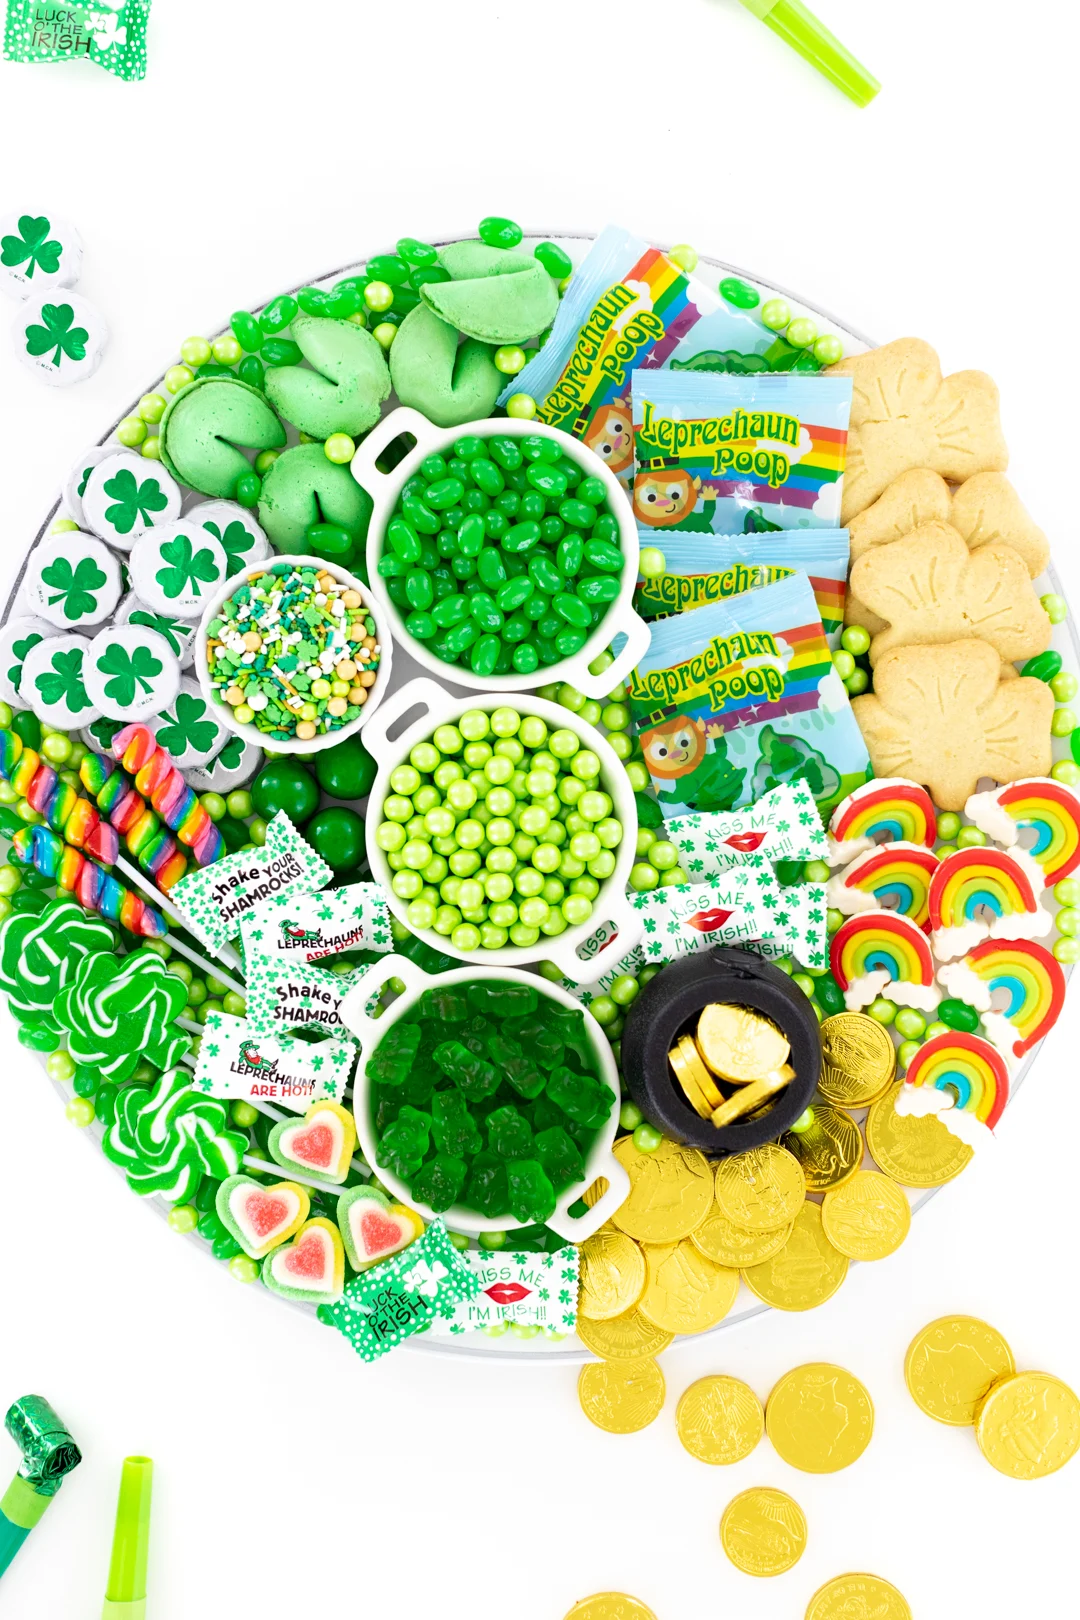 St. Patrick's Day candy board with green, rainbow and gold candies.